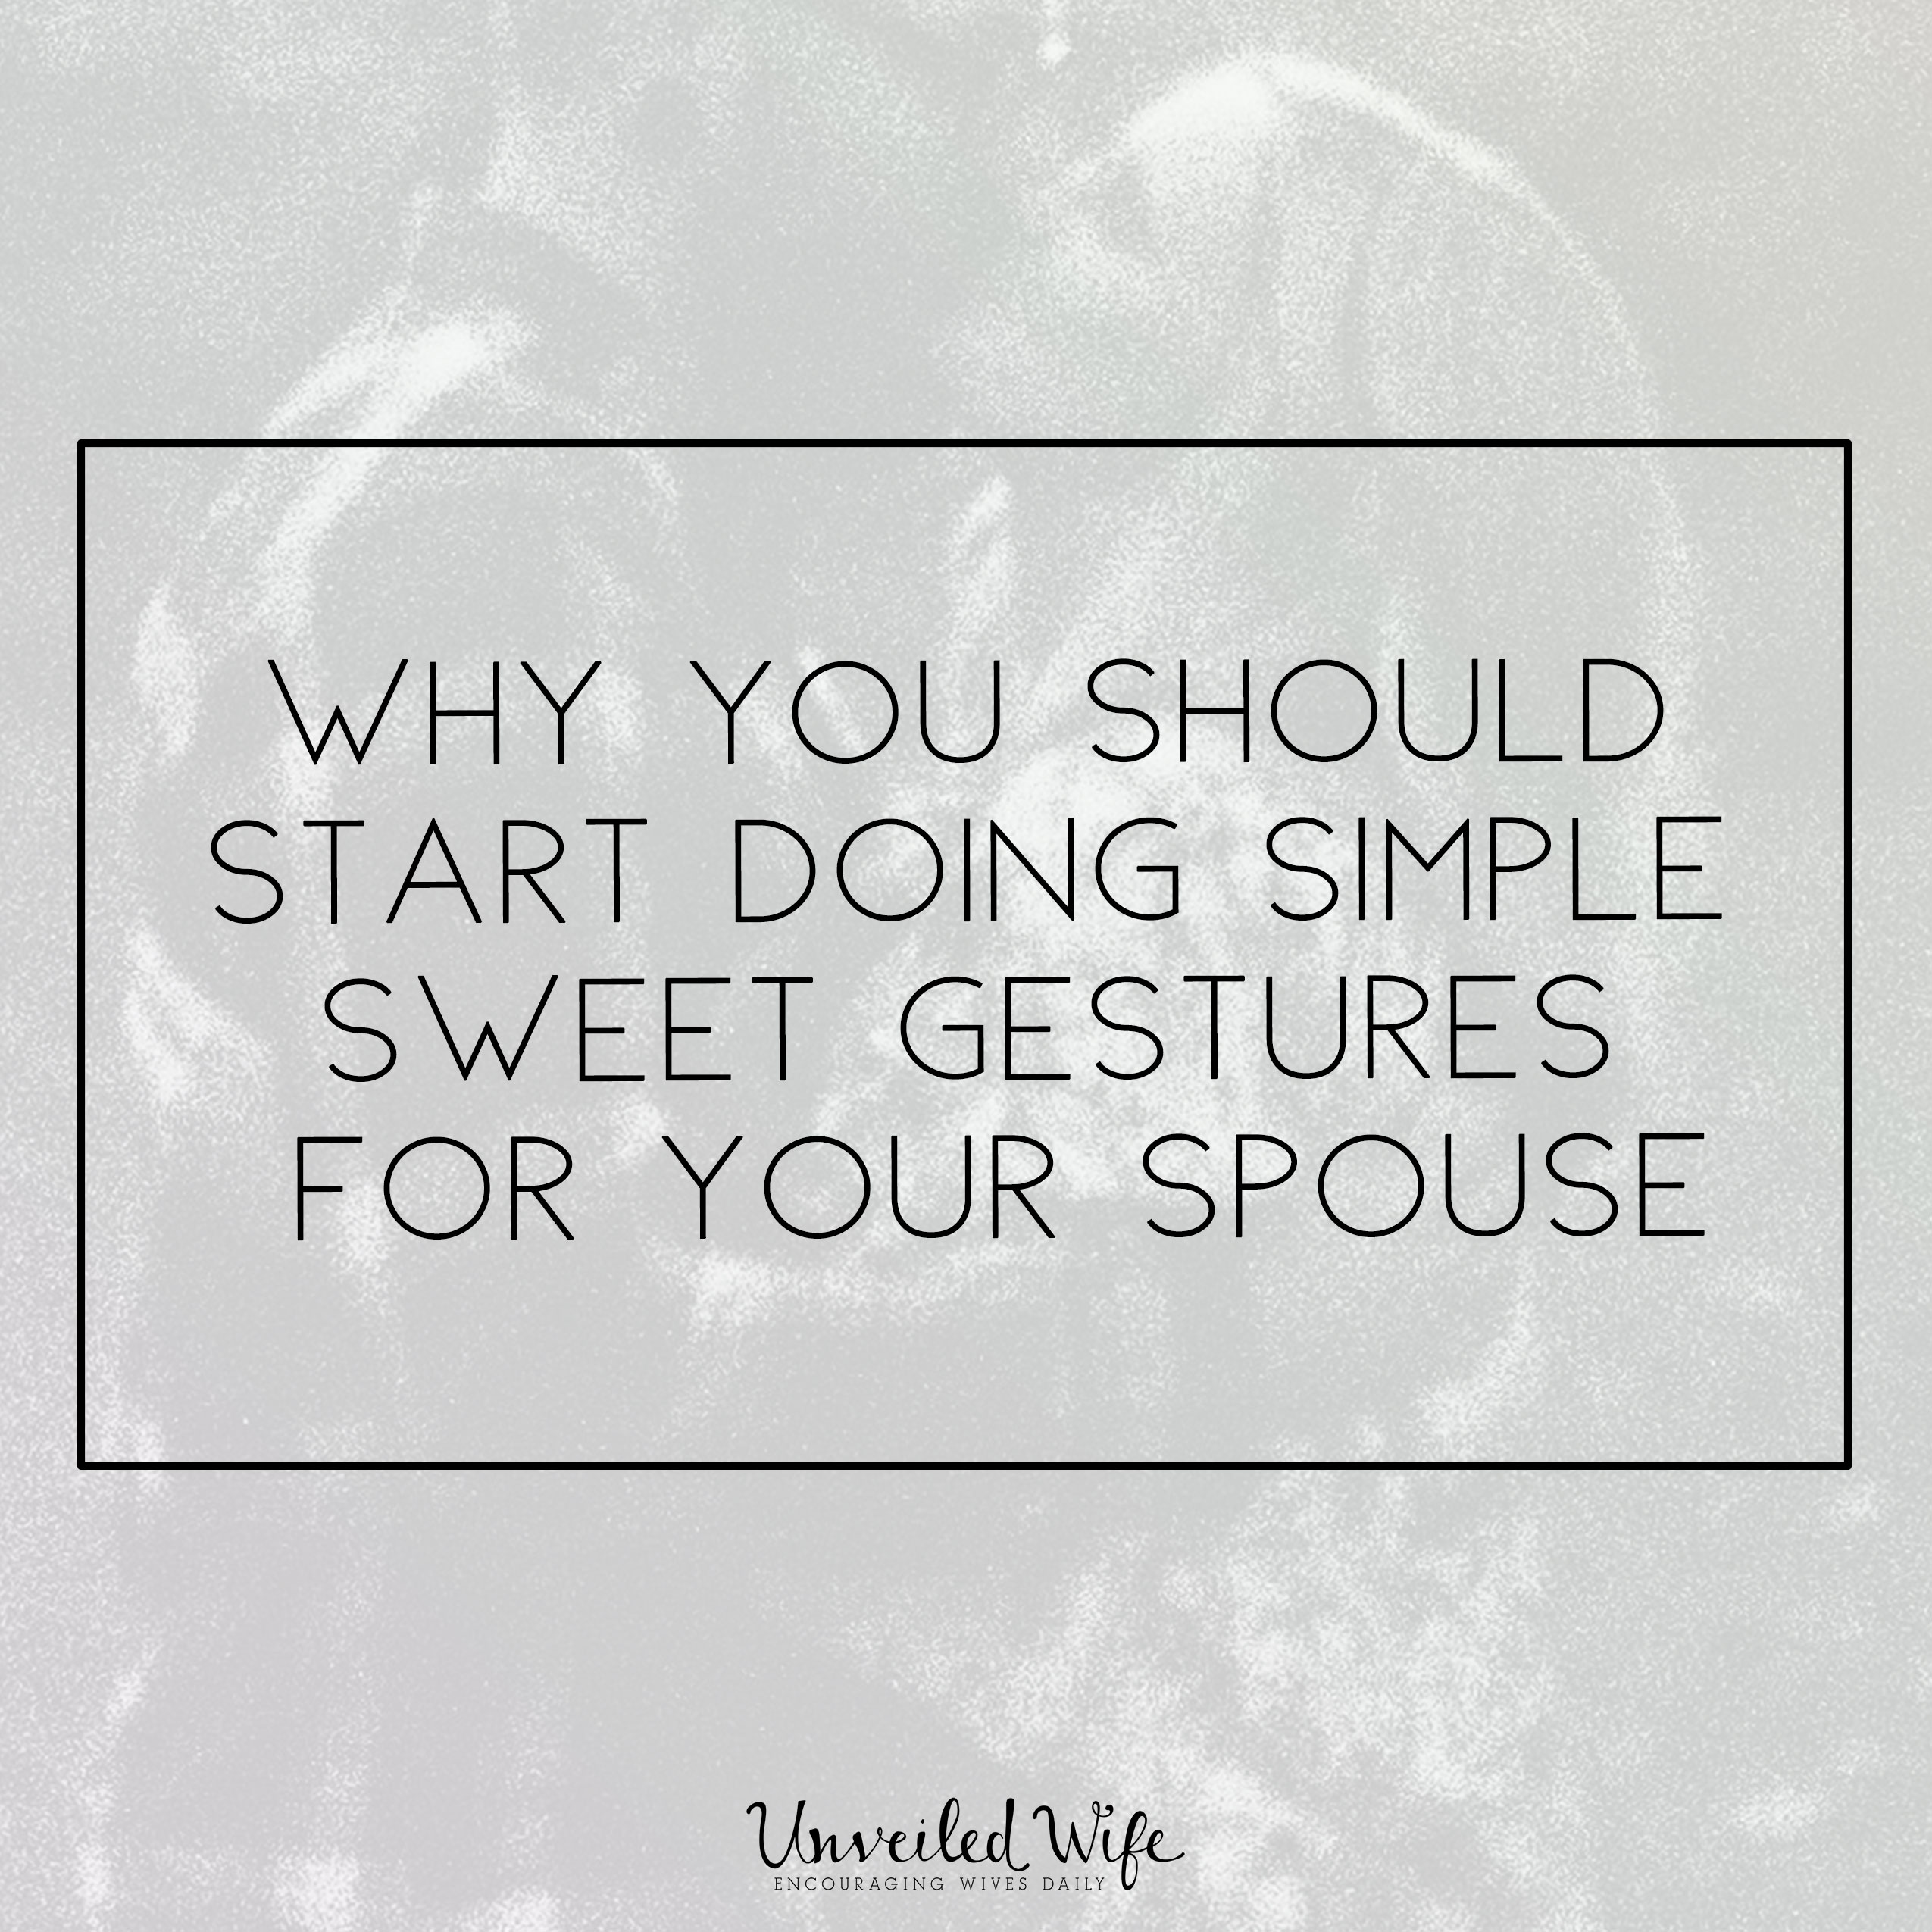 Why You Should Start Doing Simple Sweet Gestures For Your Spouse